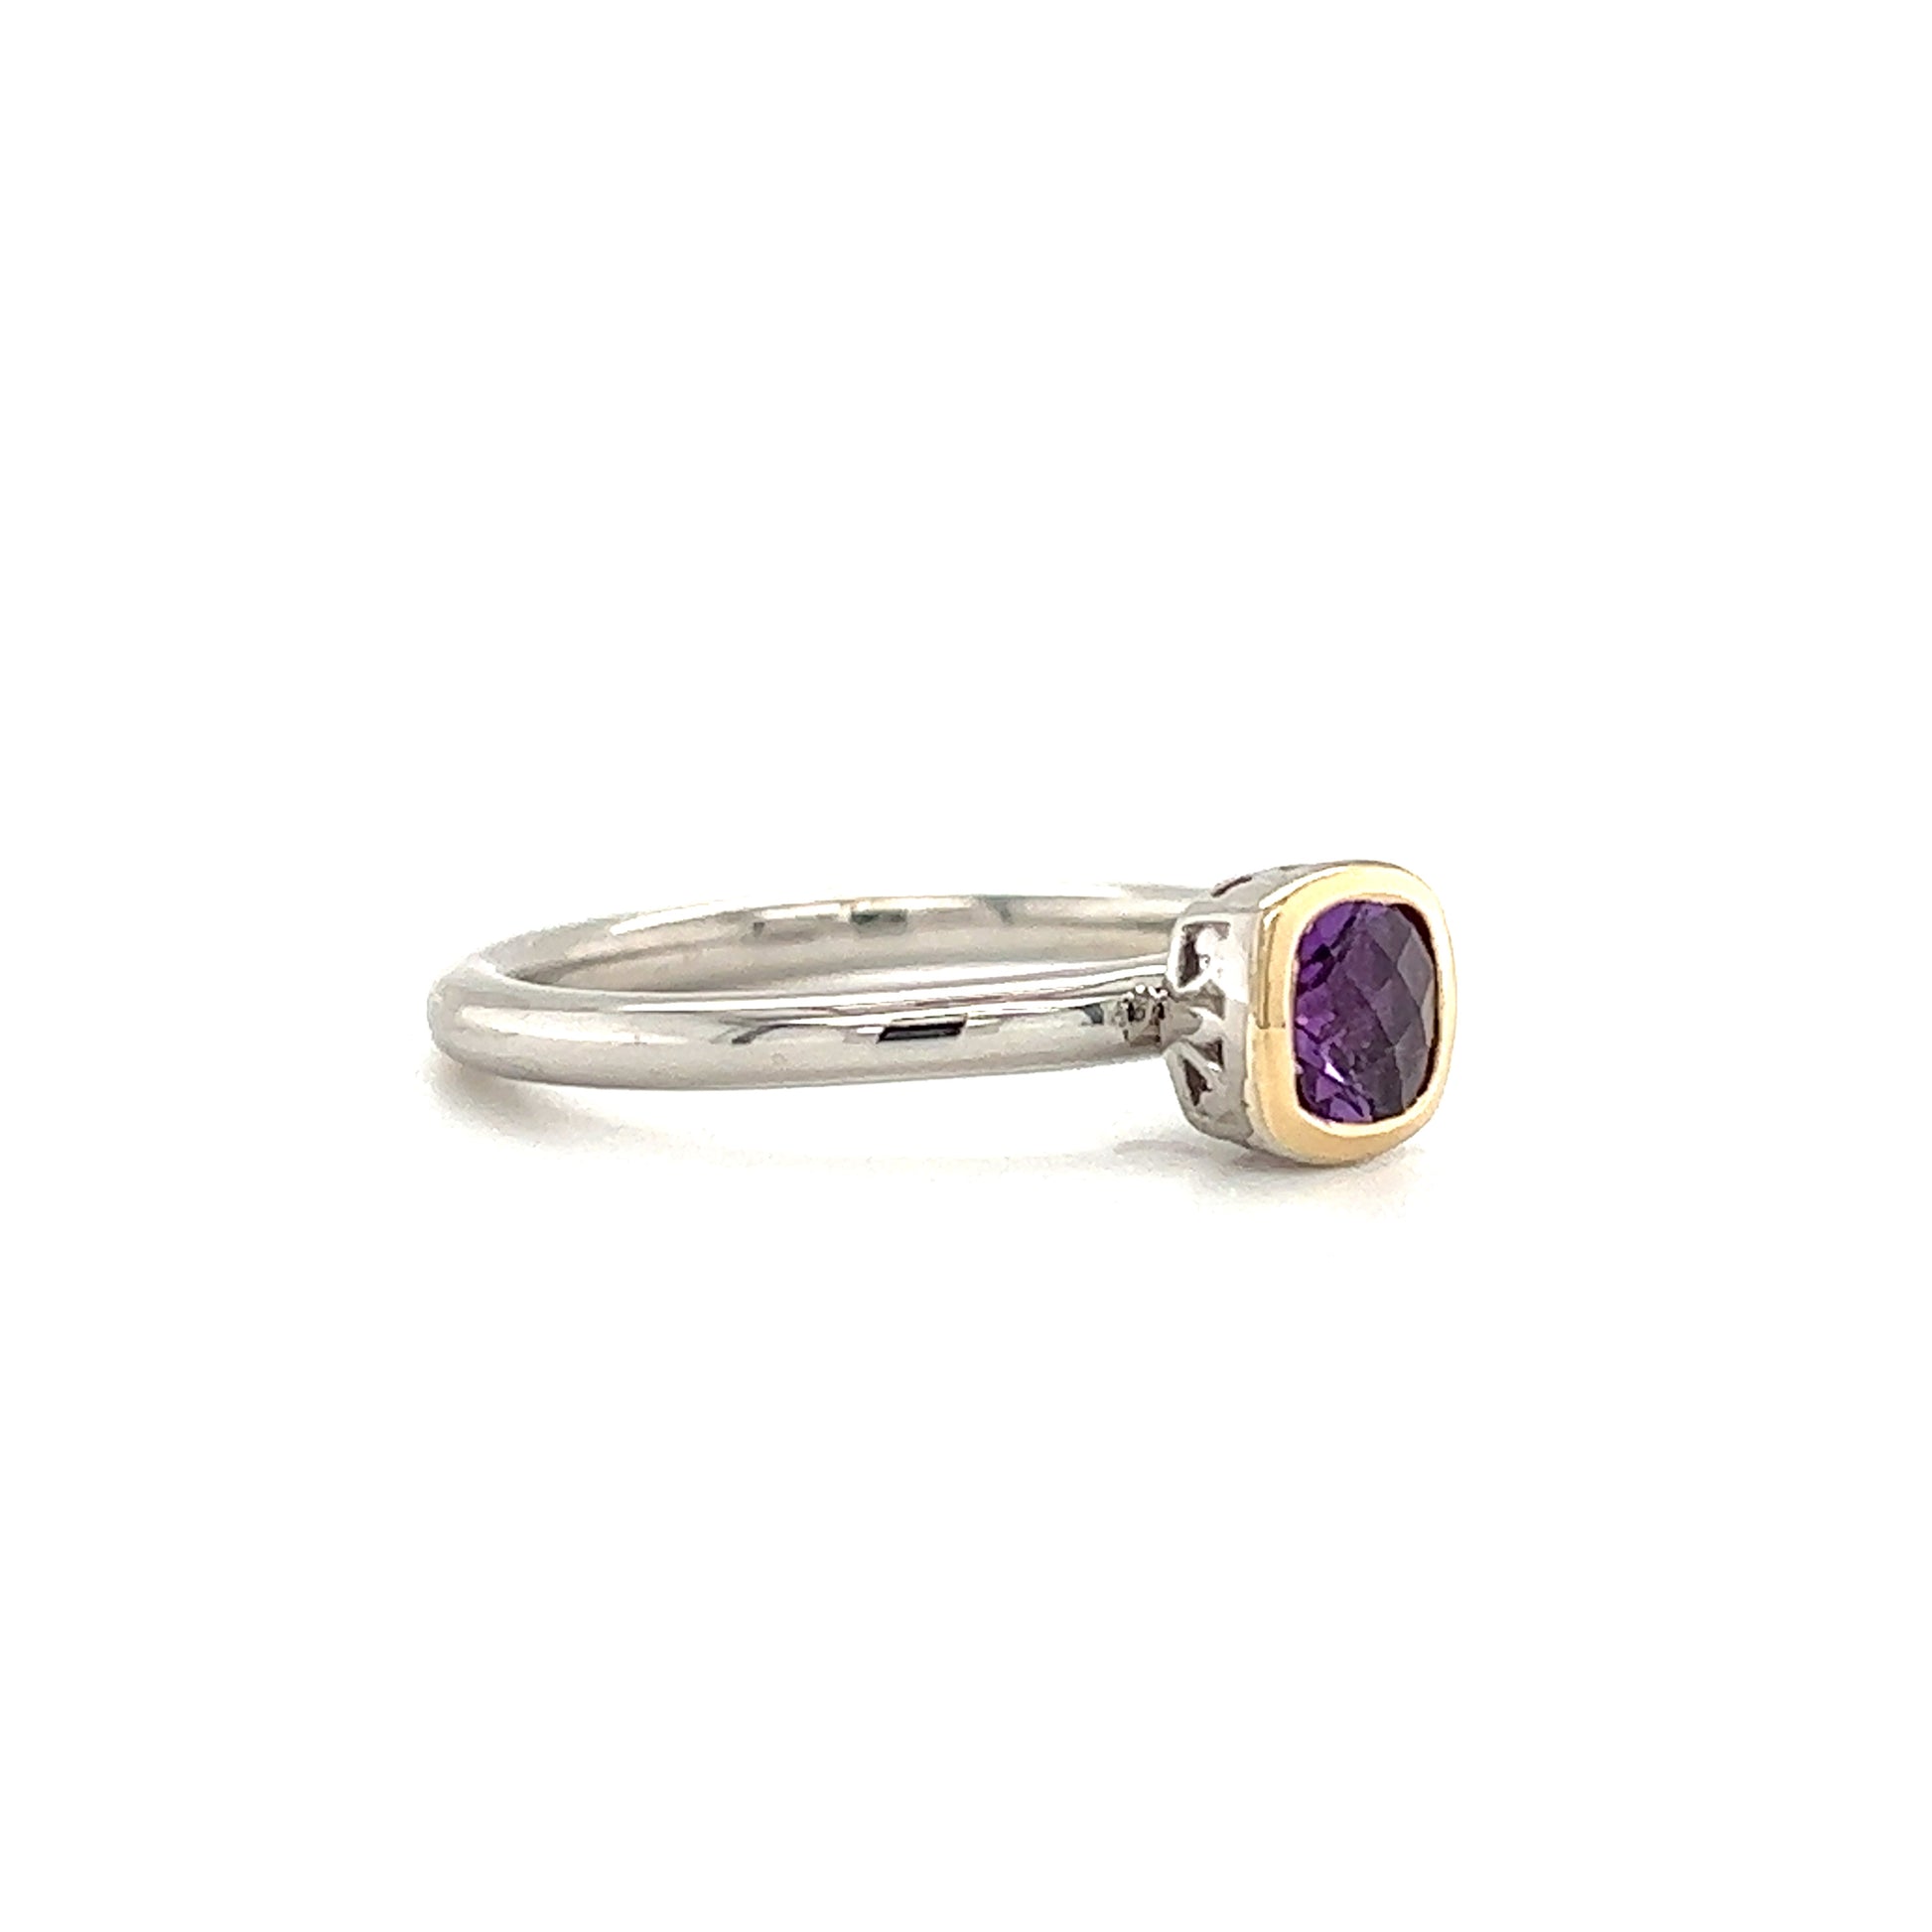 Cushion Amethyst Ring in Sterling Silver with 14K Yellow Gold Accent Right Side View